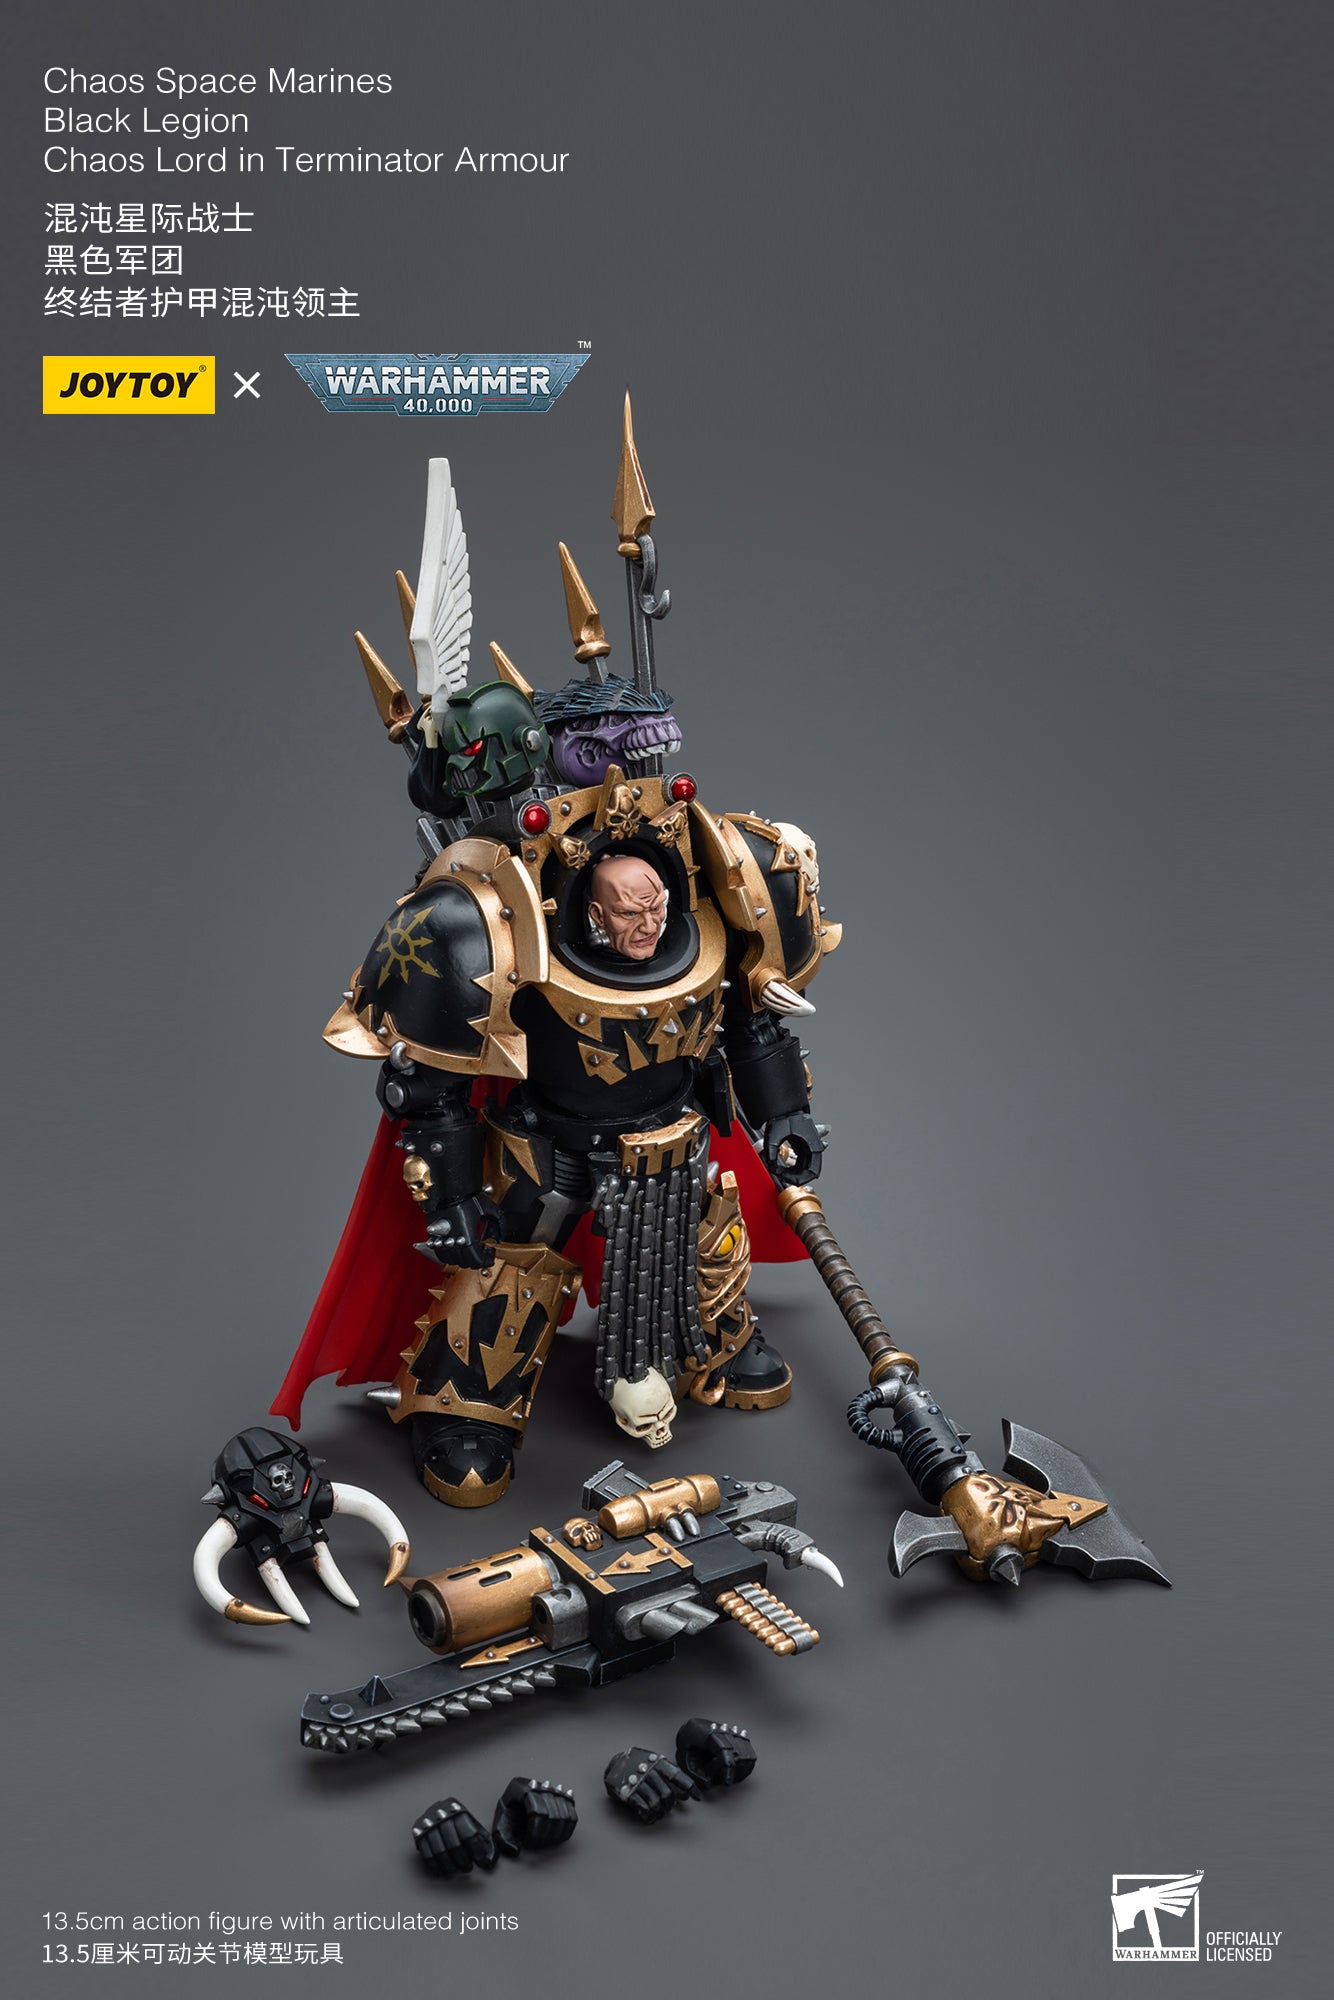 Chaos Space Marines Black Legion Chaos Lord in Terminator Armour - Warhammer 40K Action Figure By JOYTOY